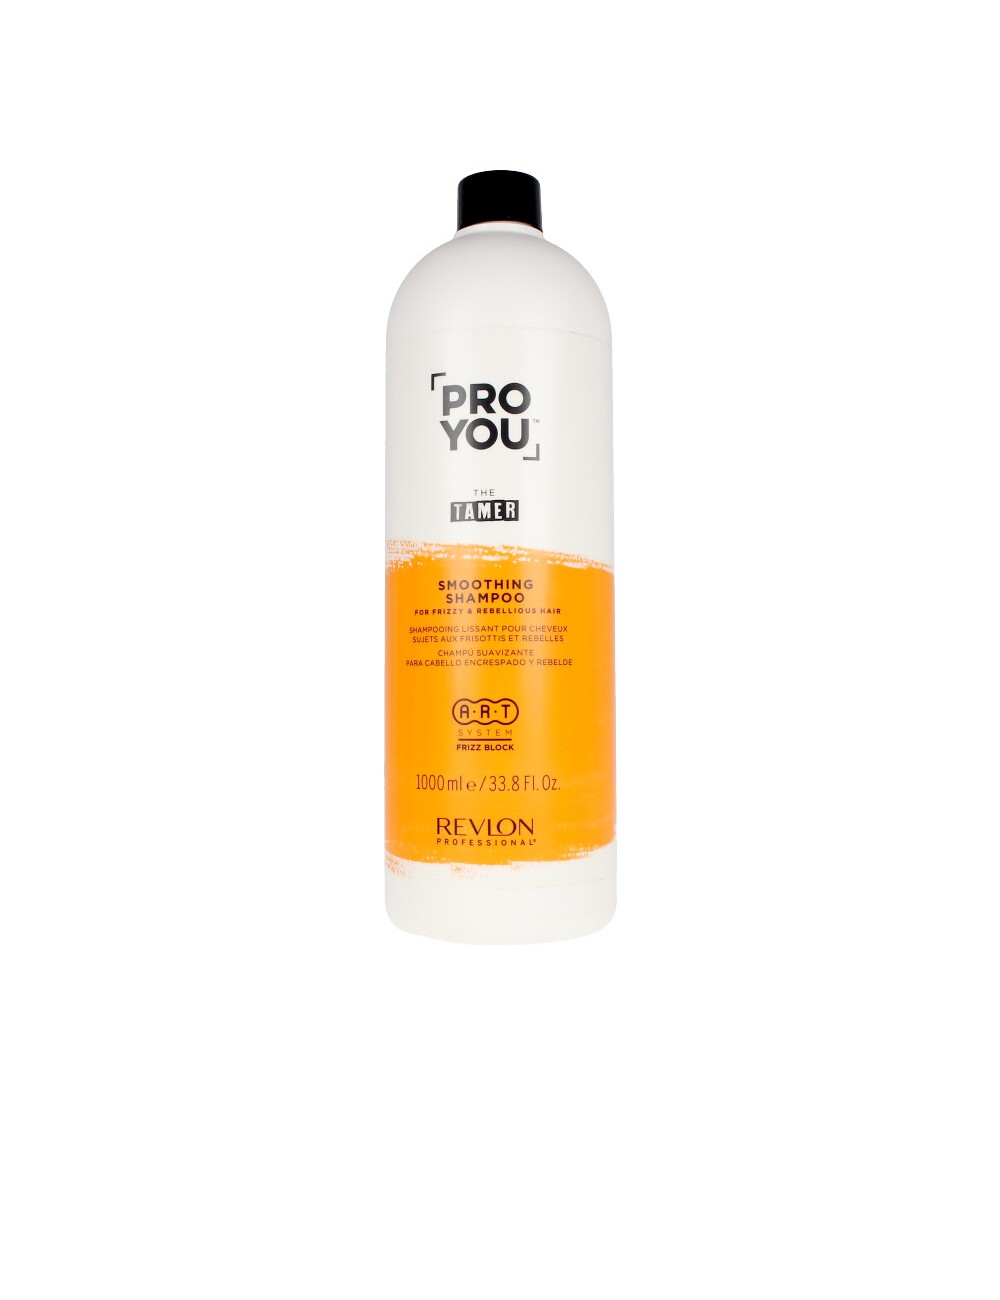 PROYOU the tamer Shampooing apaisant 1000 ml